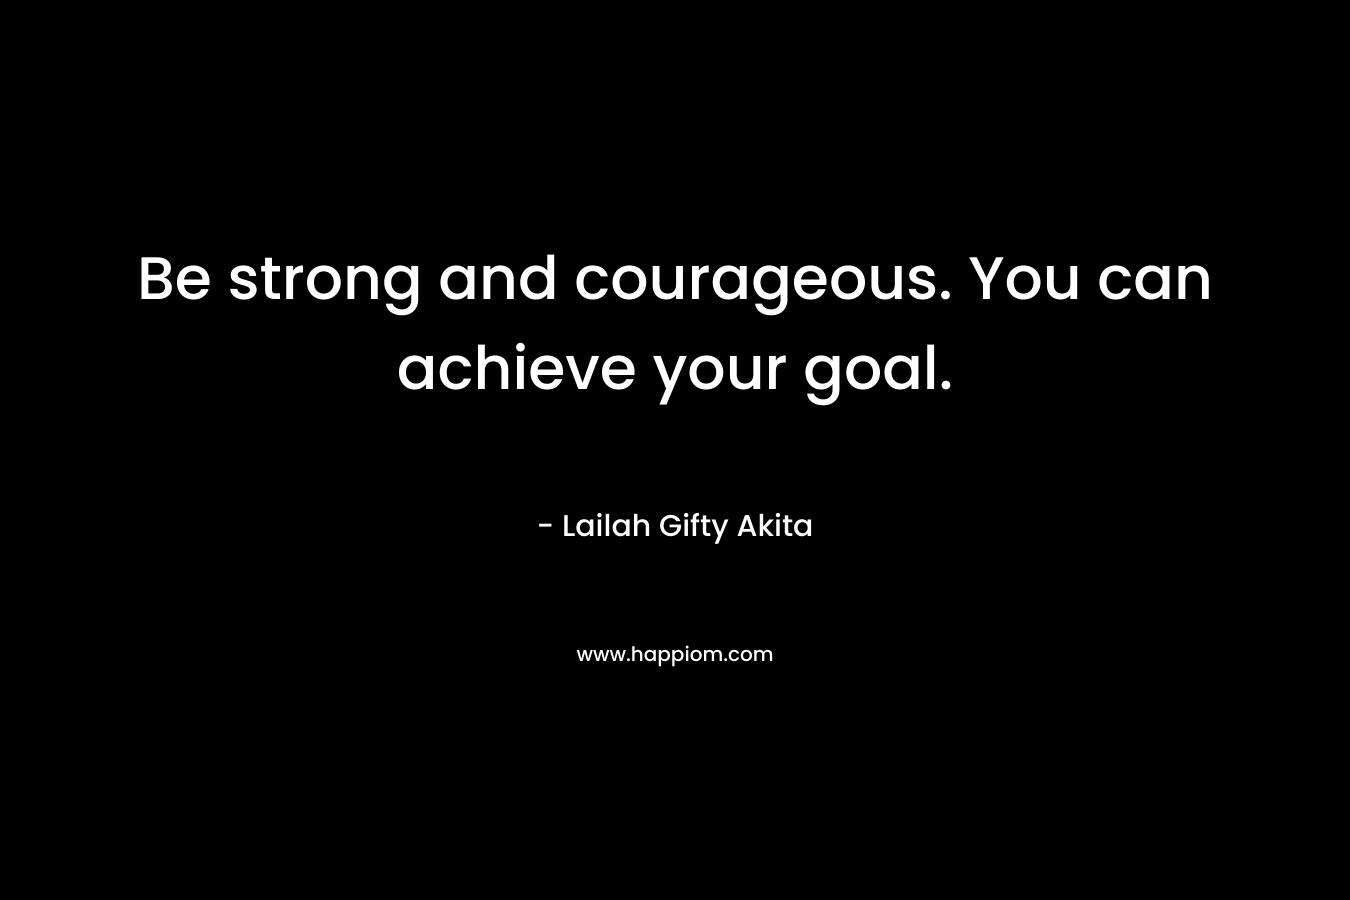 Be strong and courageous. You can achieve your goal.